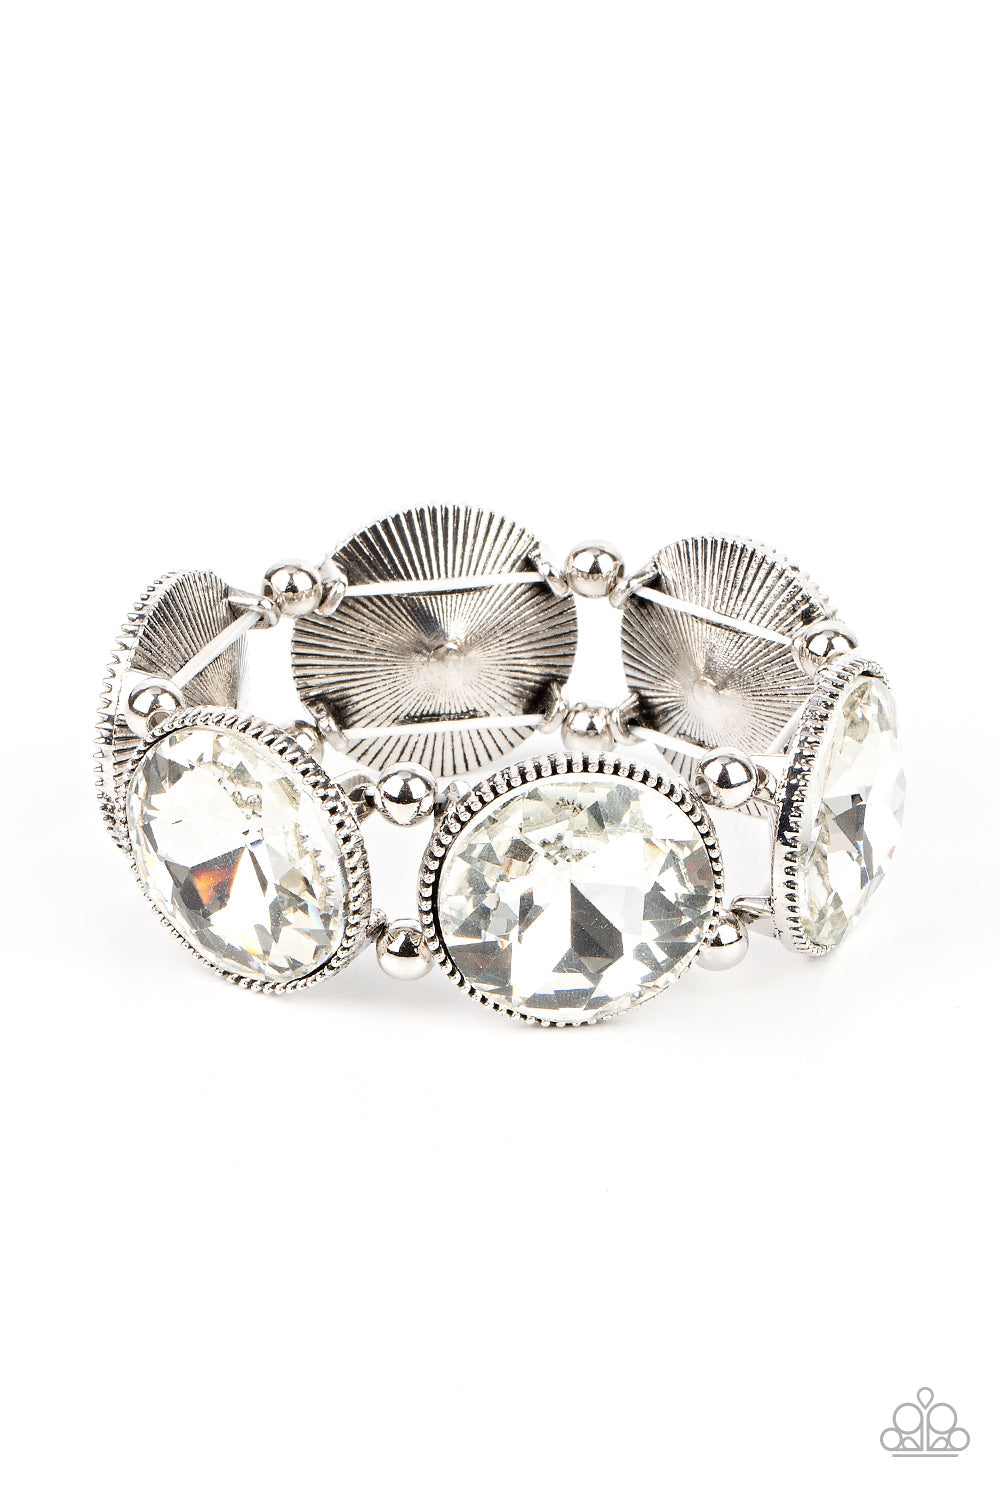 Powerhouse Hustle - White - Silver Stretchy Bracelet - Paparazzi Accessories - Infused with pairs of silver beads, a glitzy collection of dramatically oversized white rhinestone frames are threaded along stretchy bands around the wrist for a jaw-dropping dazzle. Sold as one individual bracelet.